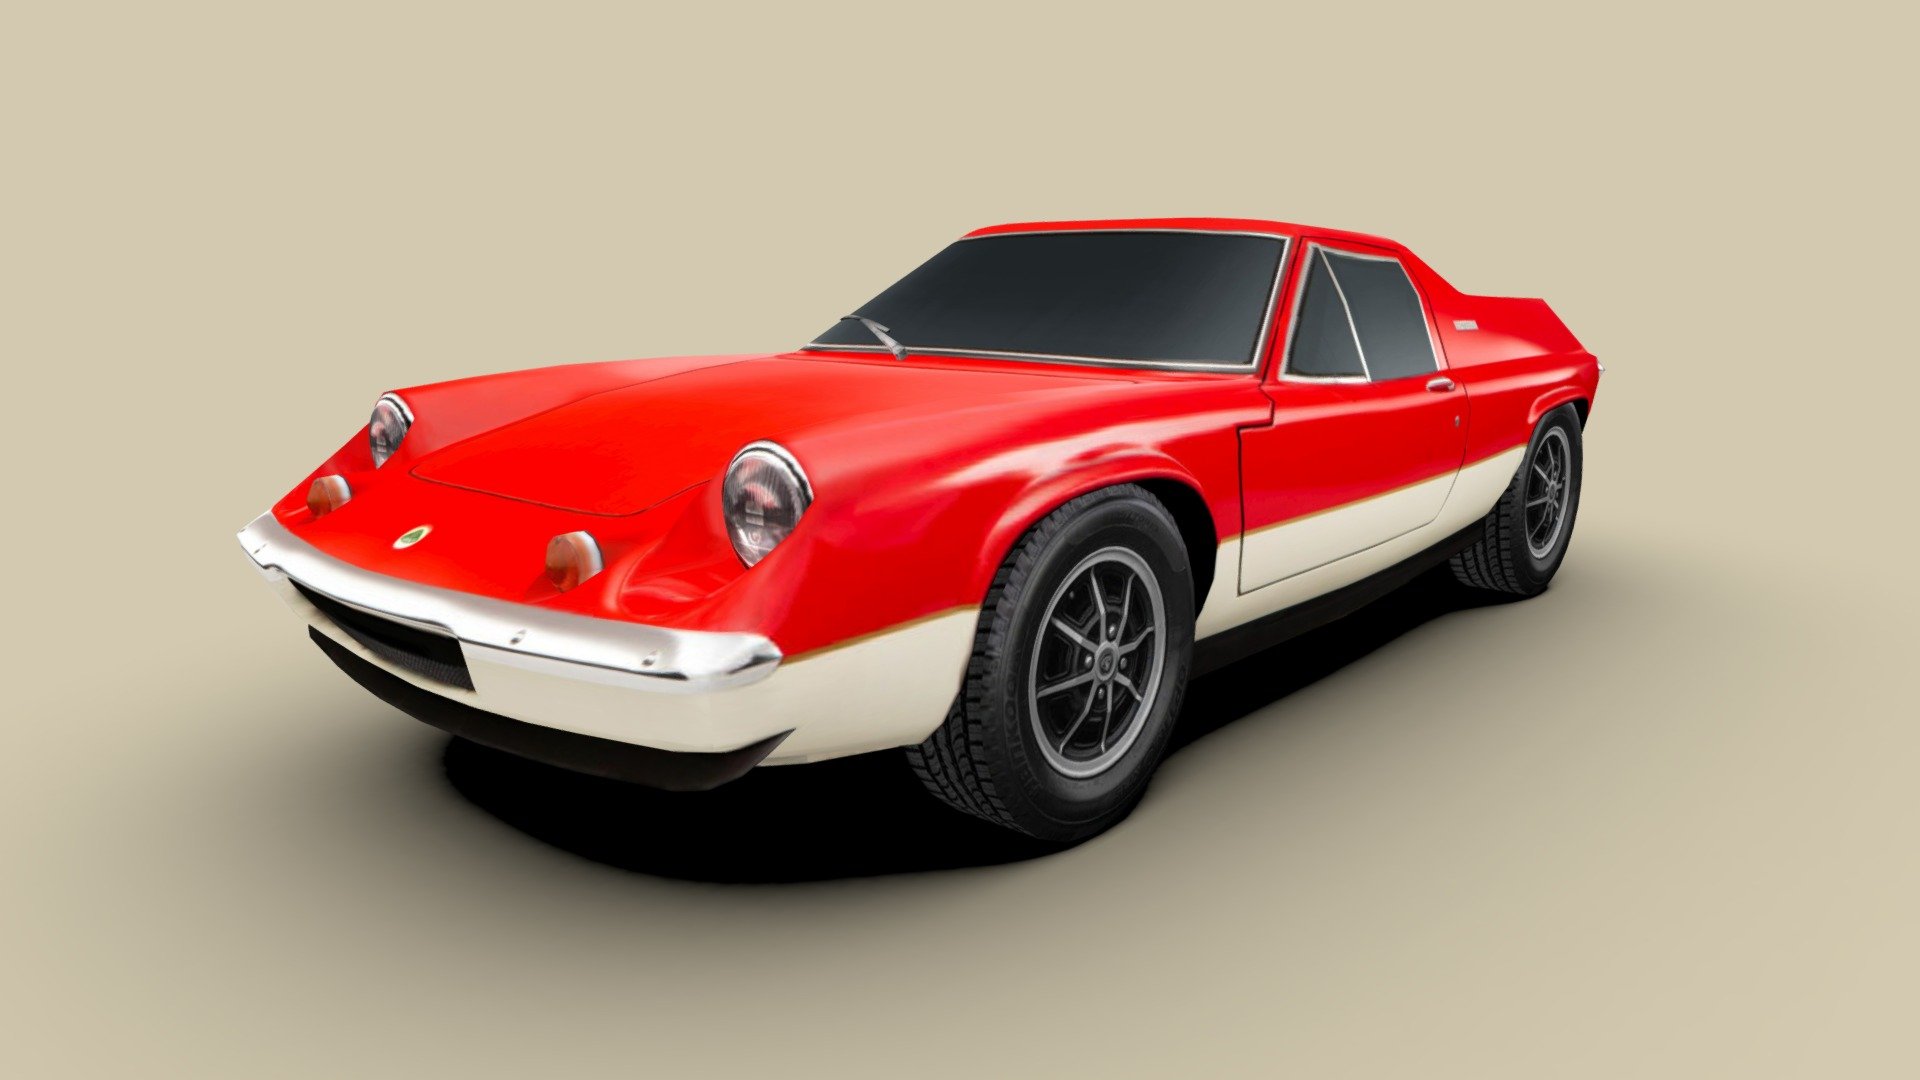 3d model of the 1972 Lotus Europa Twin Cam, type 74, a 2-door coupe sports car

The model is very low-poly, full-scale, real photos texture (single 2048 x 2048 png).

Package includes 5 file formats and texture (3ds, fbx, dae, obj and skp)

Hope you enjoy it.

José Bronze - Lotus Europa 1972 - Buy Royalty Free 3D model by Jose Bronze (@pinceladas3d) 3d model